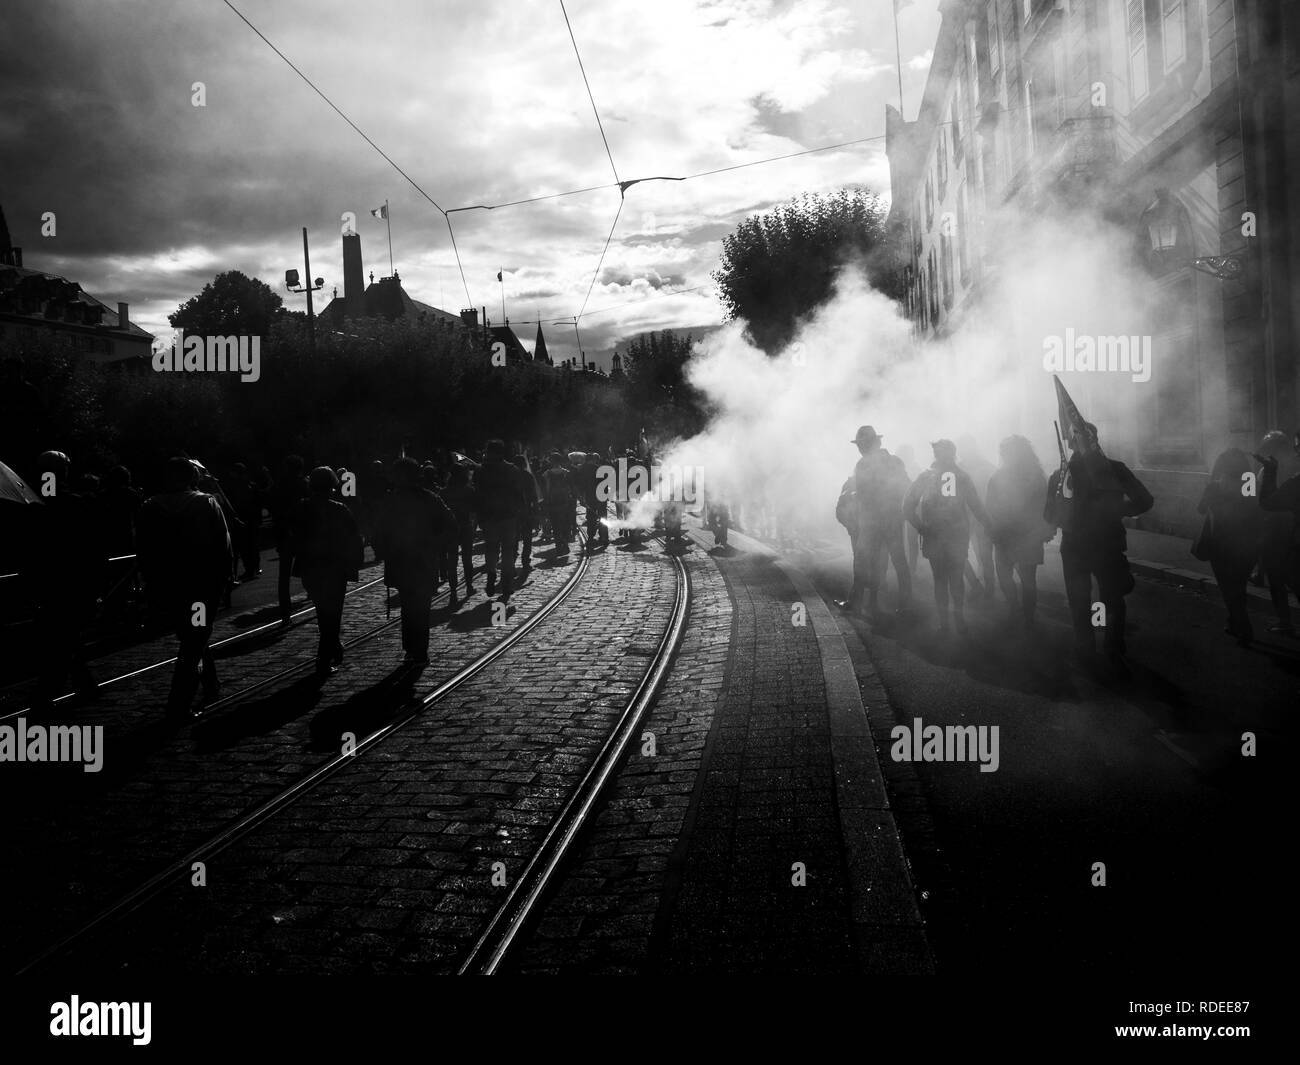 STRASBOURG, FRANCE - SEP 12, 2018: Smoke grenade thrown by people during French Nationwide day of protest against labor reform proposed by Emmanuel Macron Government - black and white  Stock Photo